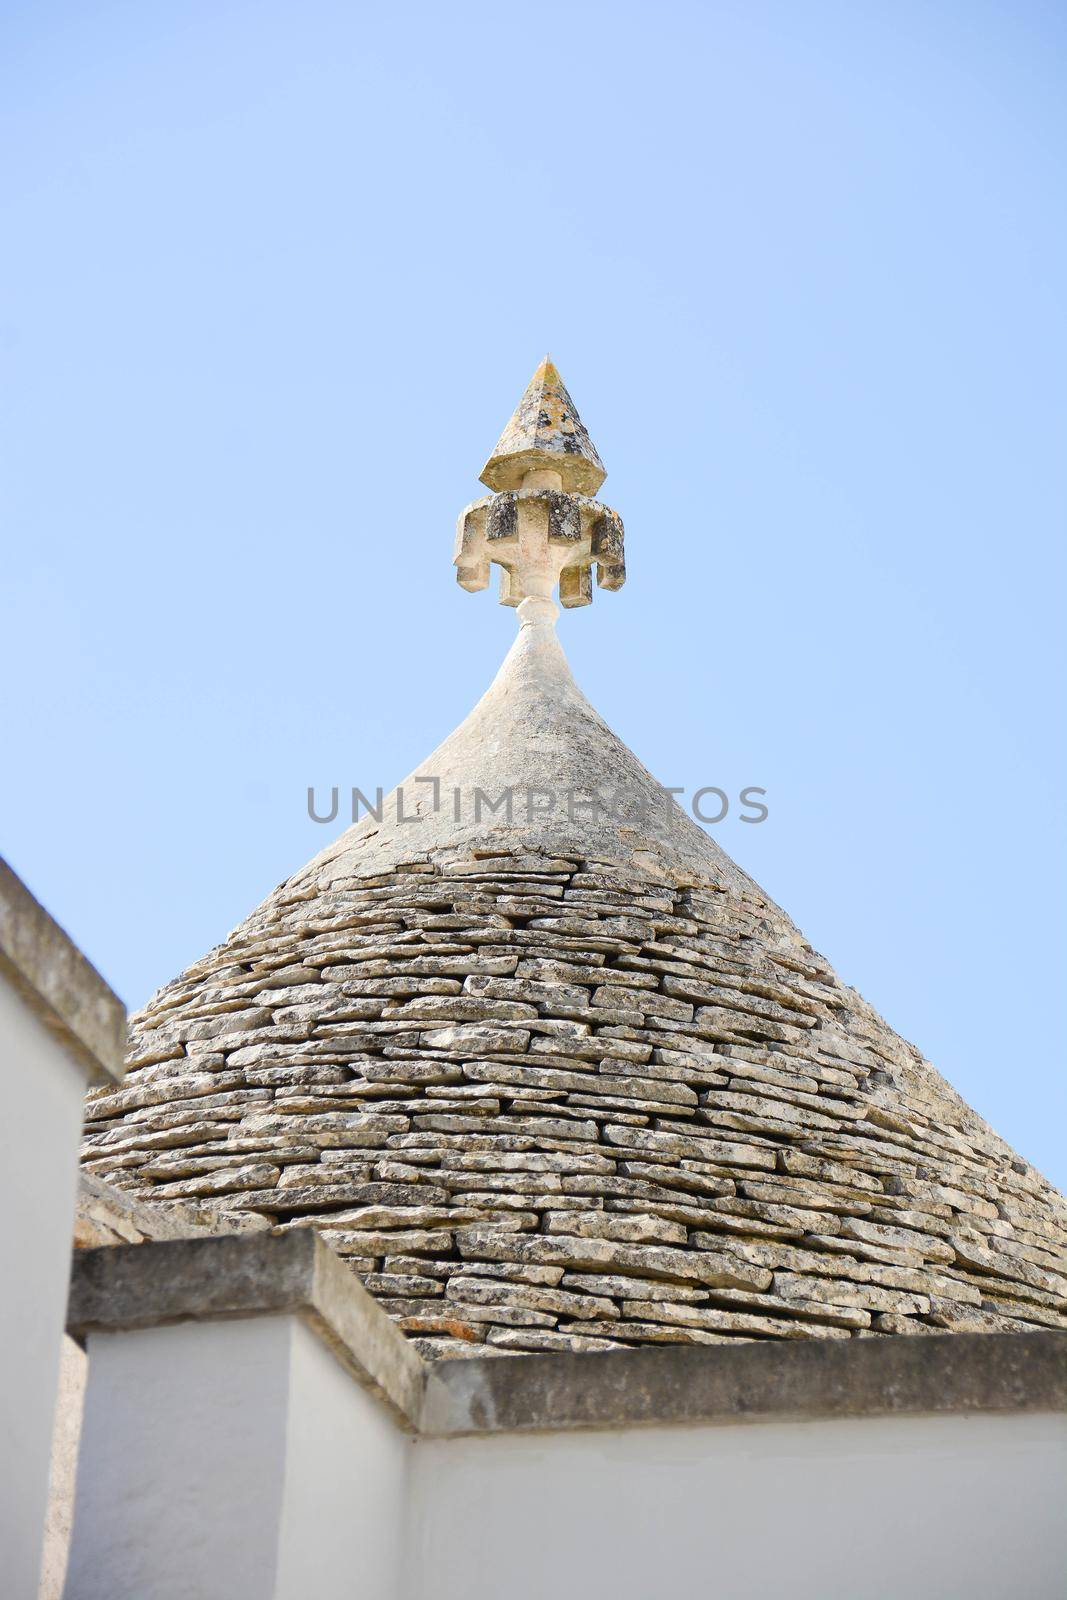 magic superstitious and esoteric symbols placed to finish the roofs of trulli in antiquity to chase away evil spirits